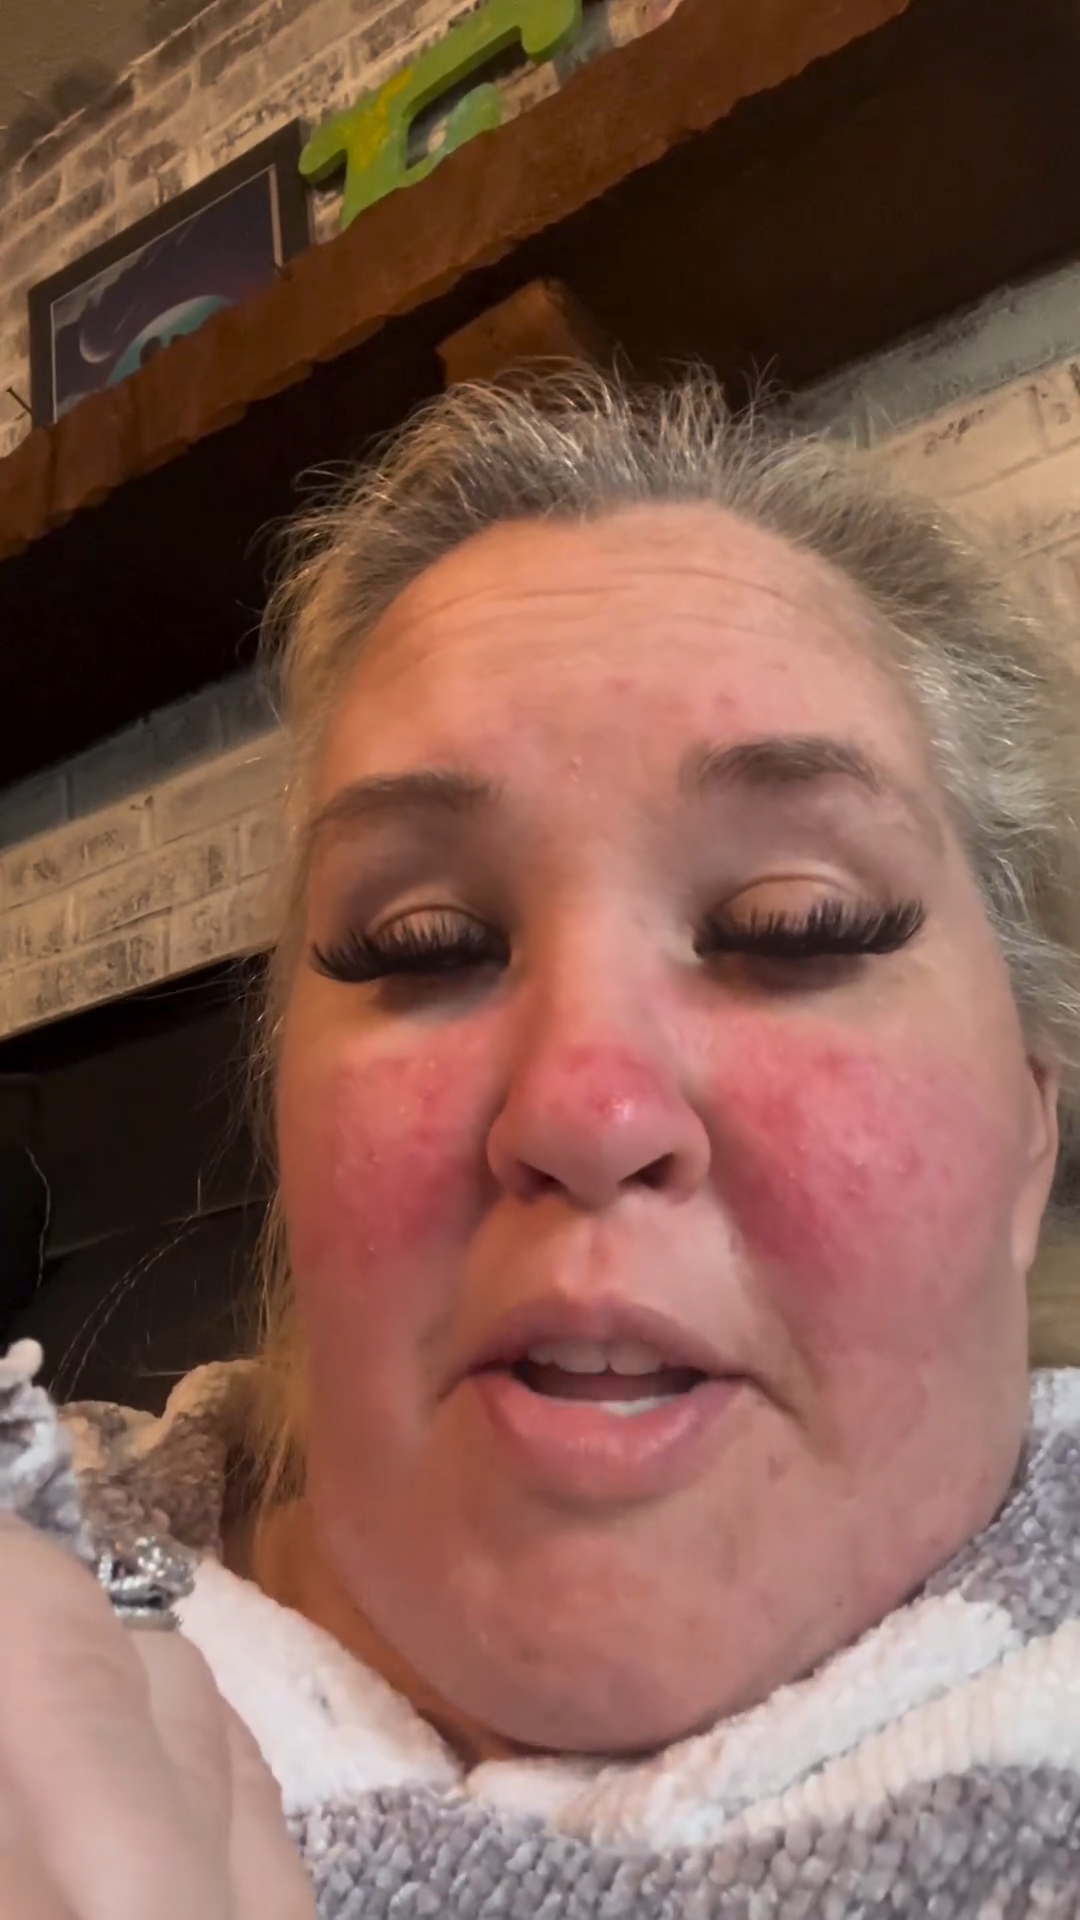 Mama June has taken to the comments section on social media to clap back at fans